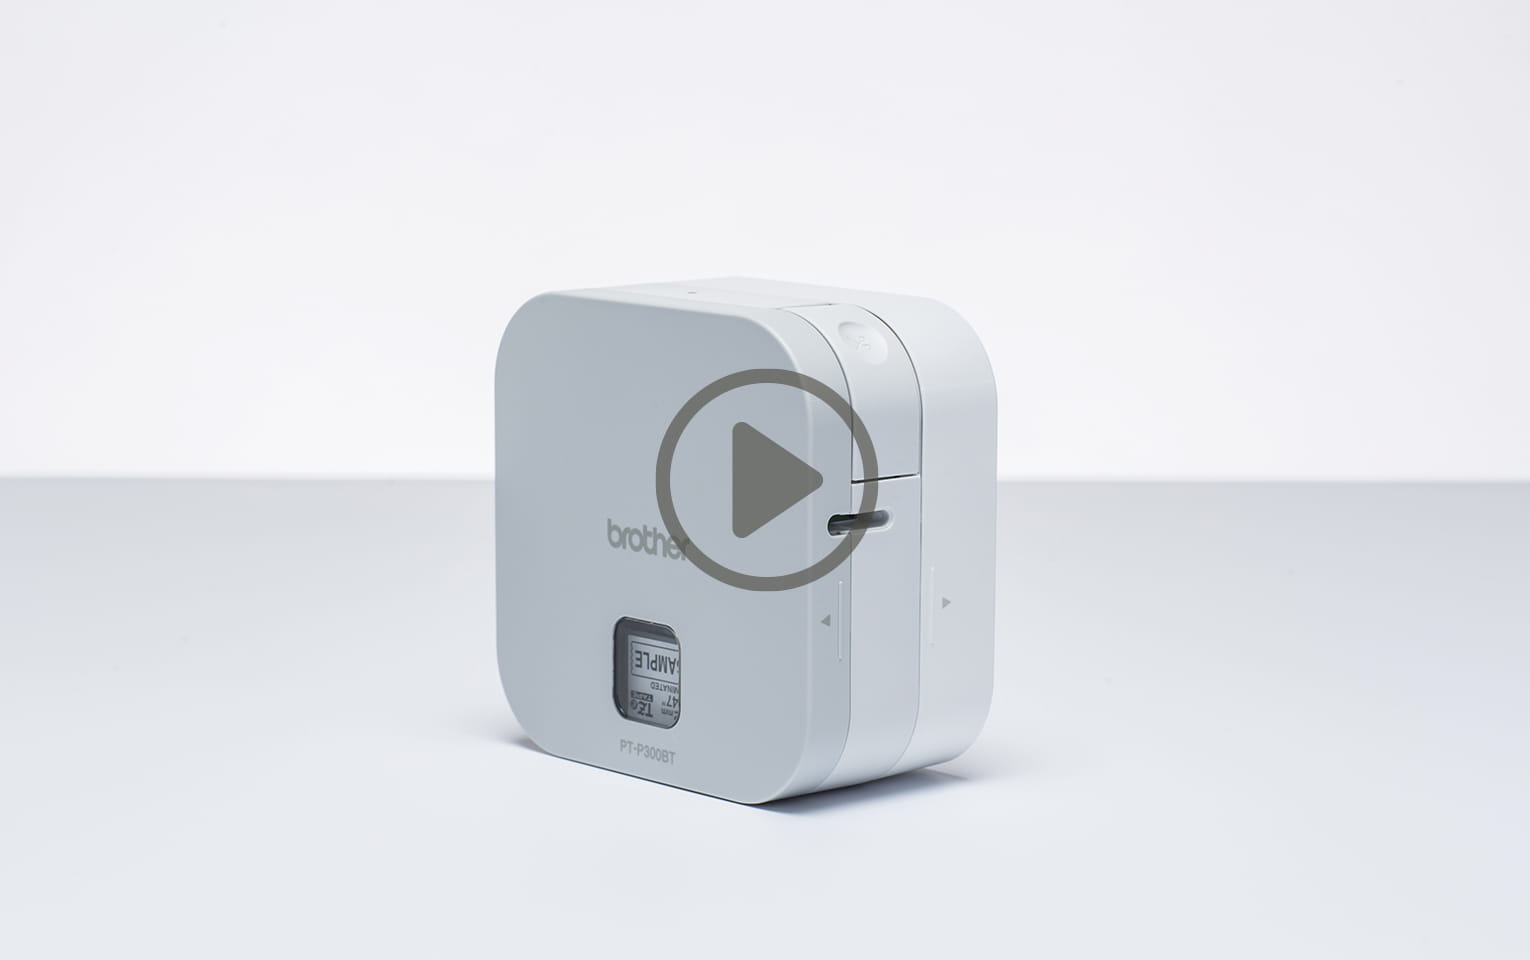 Bluetooth label printer | P-touch CUBE | Brother